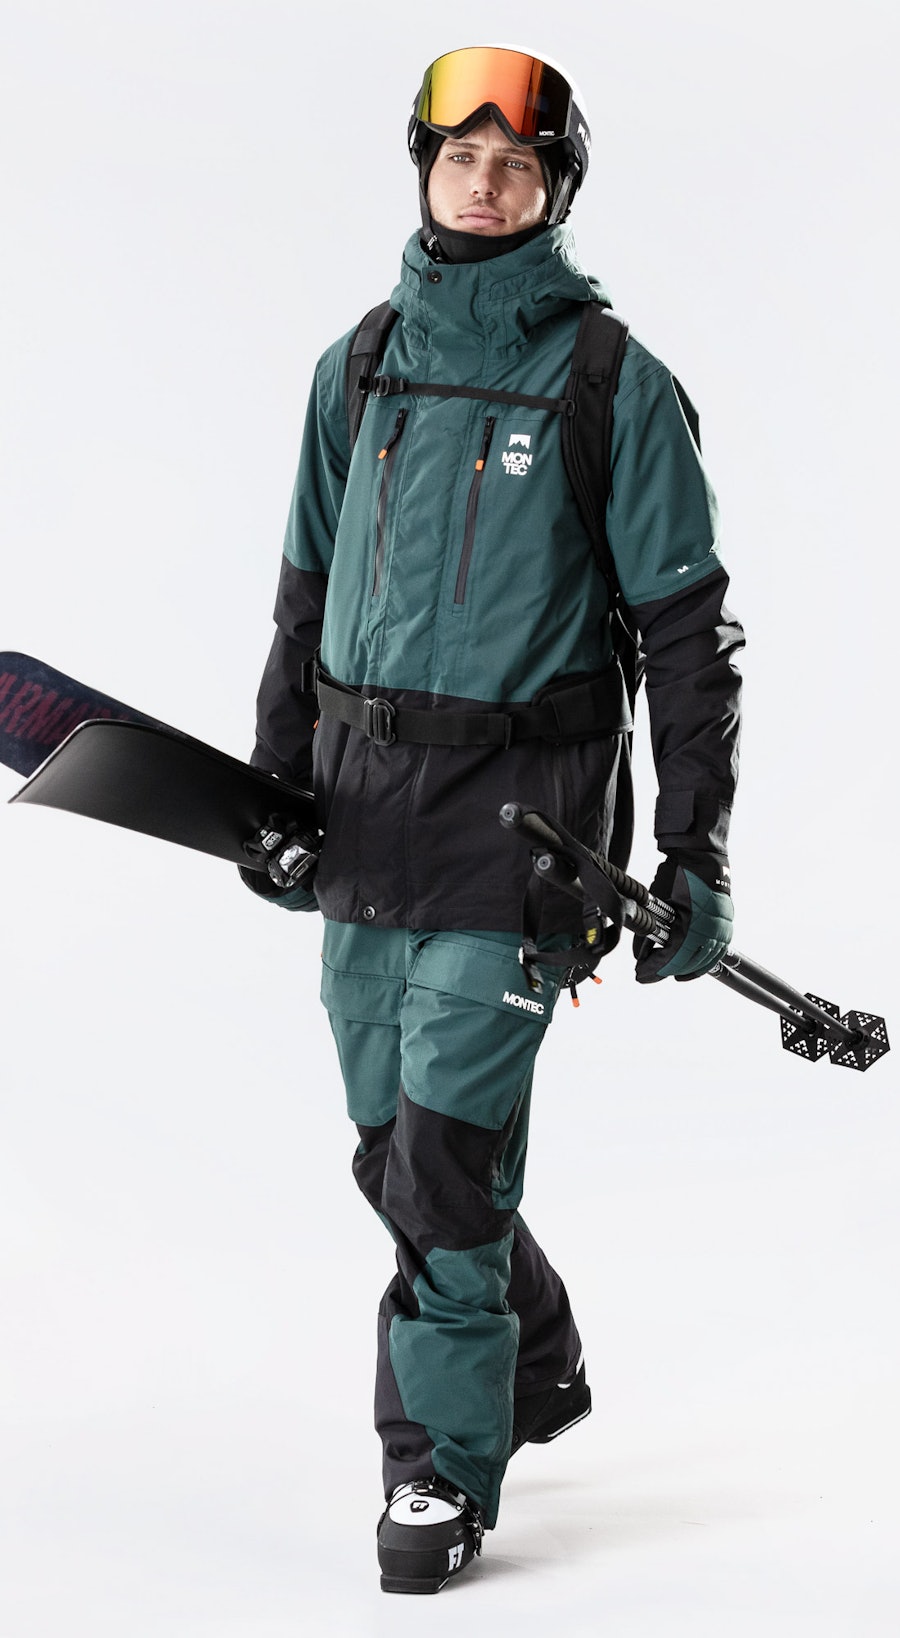 Ski clothing packages